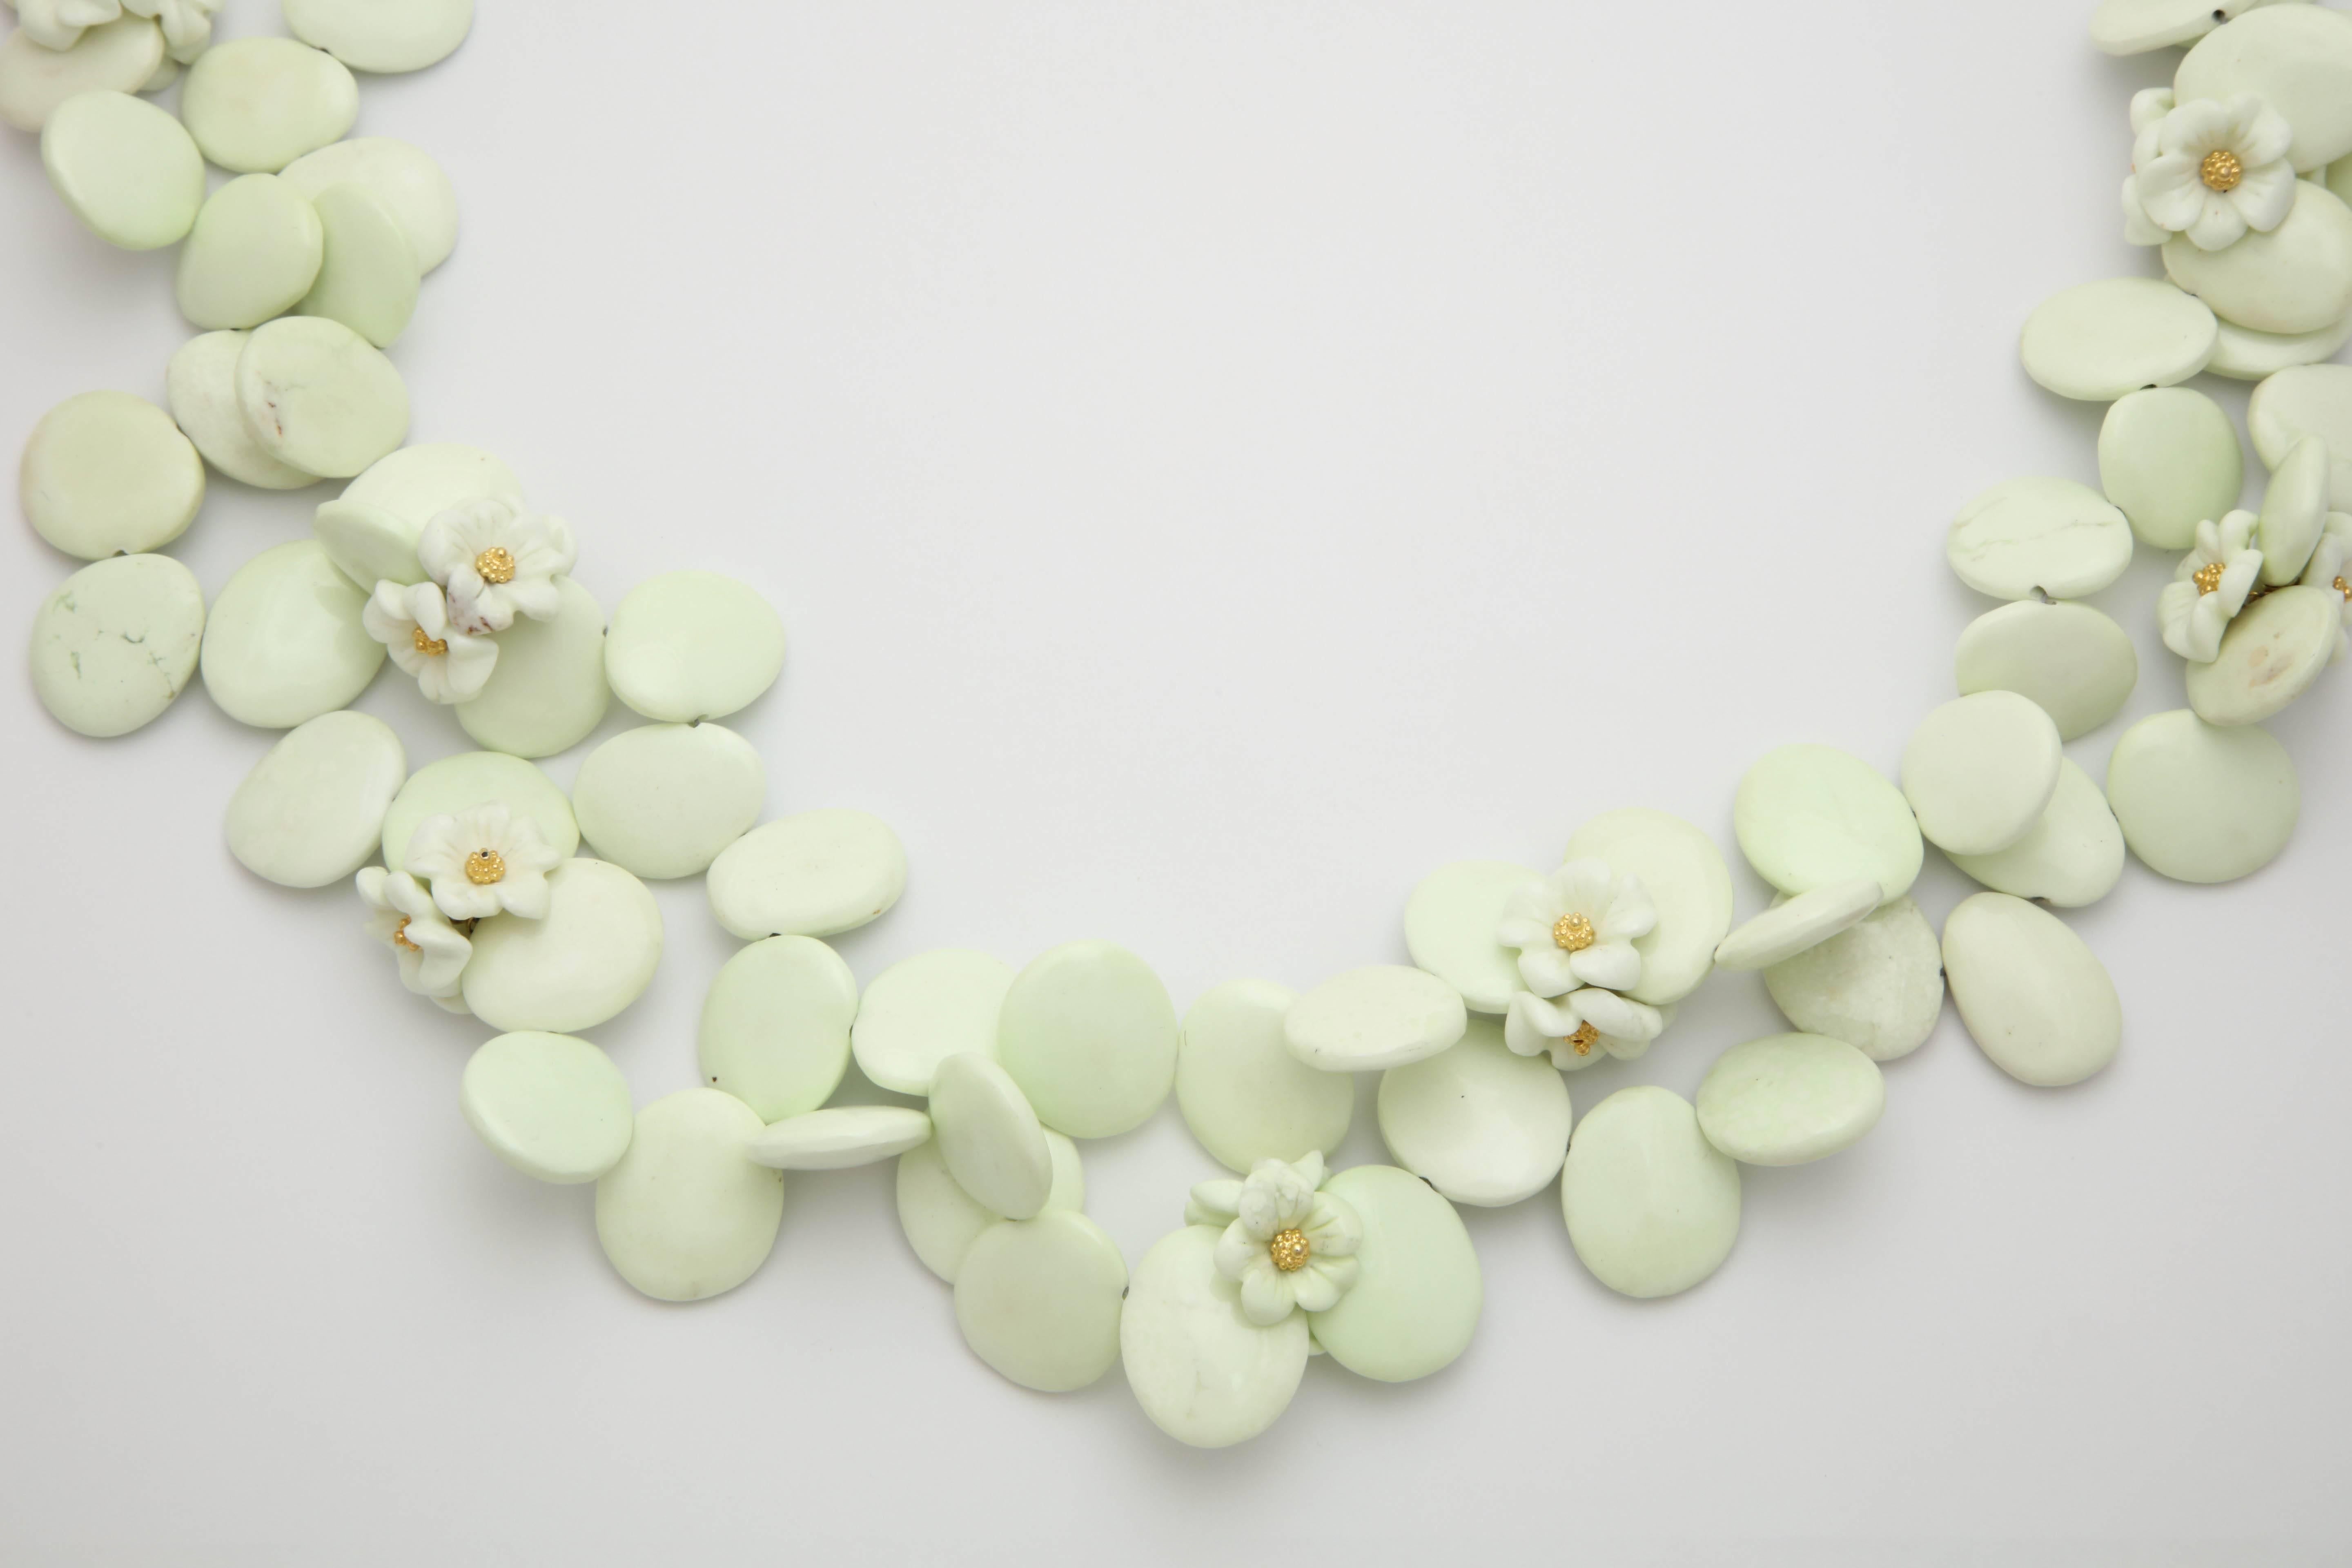 A pair of Lemon Chrysophrase Necklaces. The necklaces are composed of lemon chrysophrase petals and flower beads. The center of each flower has an 18kt yellow gold flower bead. The clasps are 18kt yellow gold.
Length: 39.00 inches
Width: .75 inch